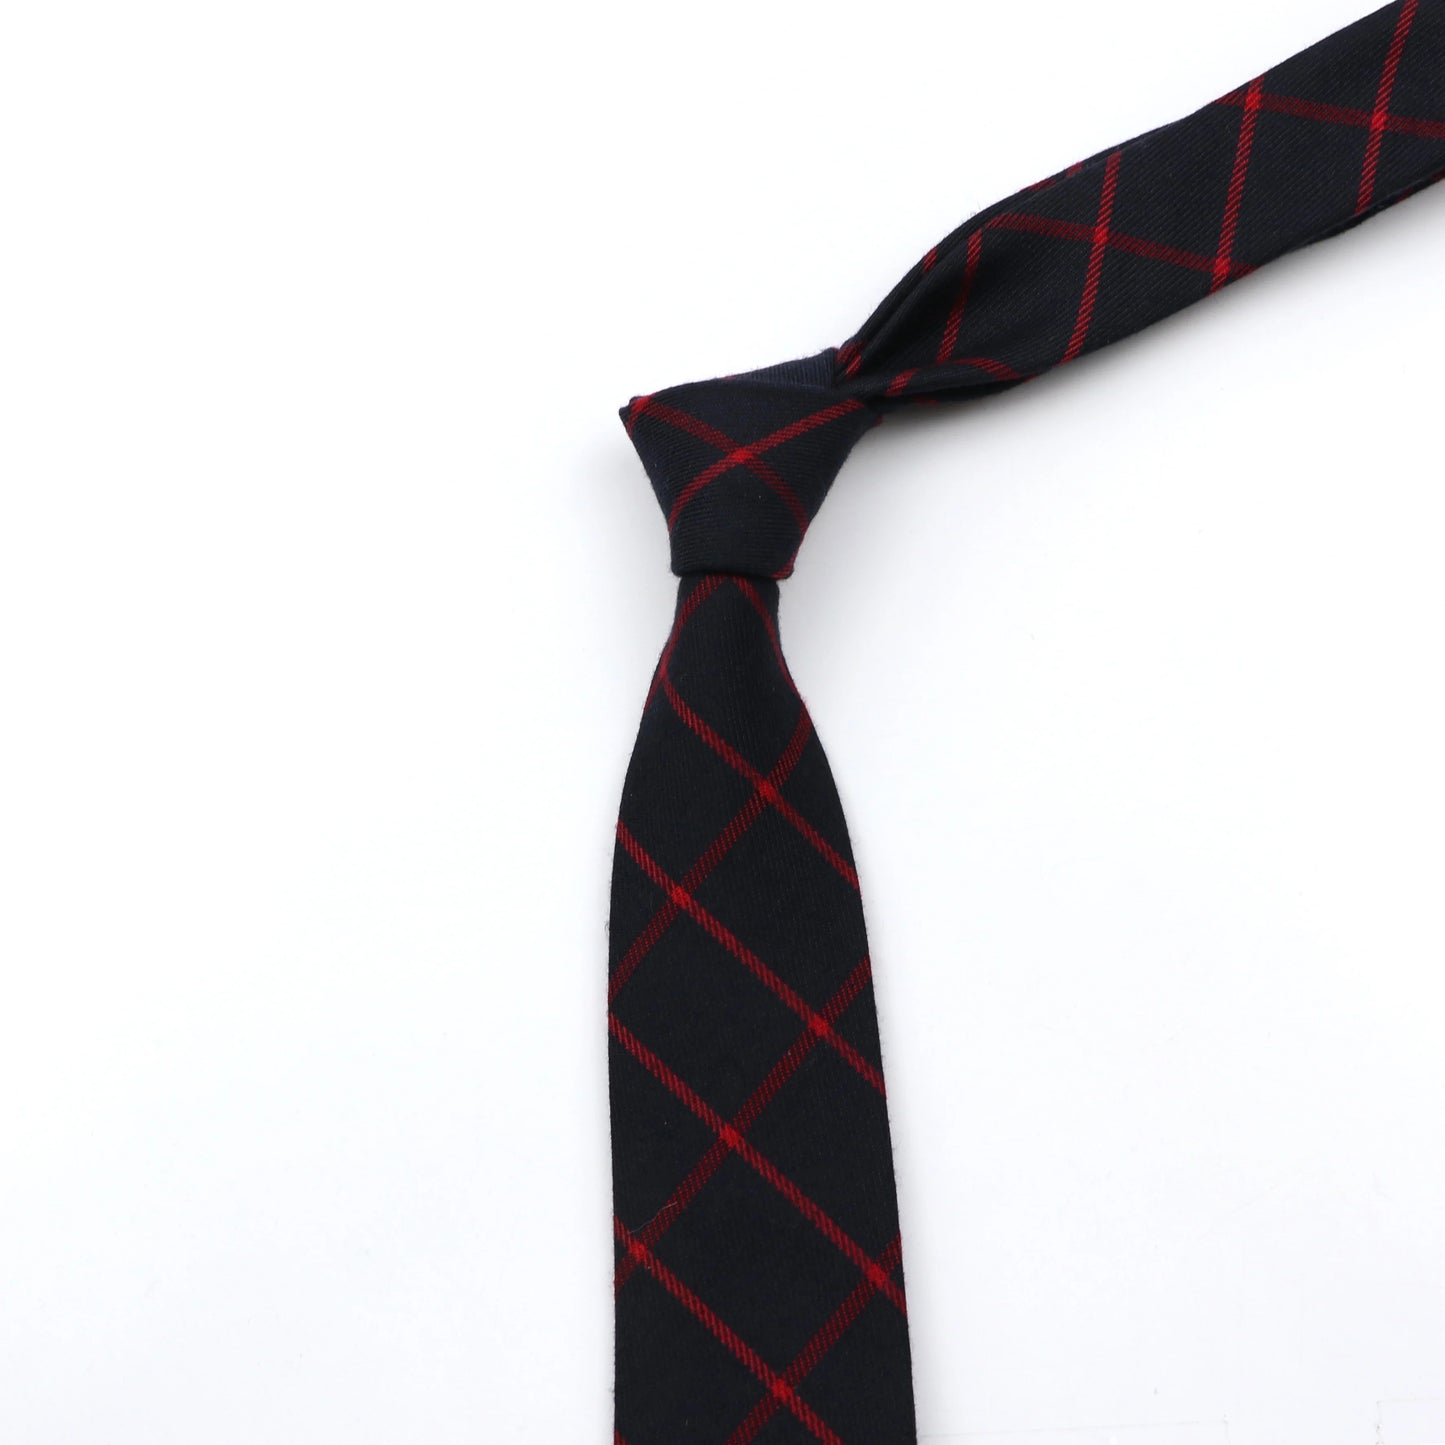 Classic Plaid Cotton Necktie: 6cm Slim Fashion Tie for Men's Tuxedo Suit, Ideal for Parties, Business, and Casual Occasions, Perfect Gift